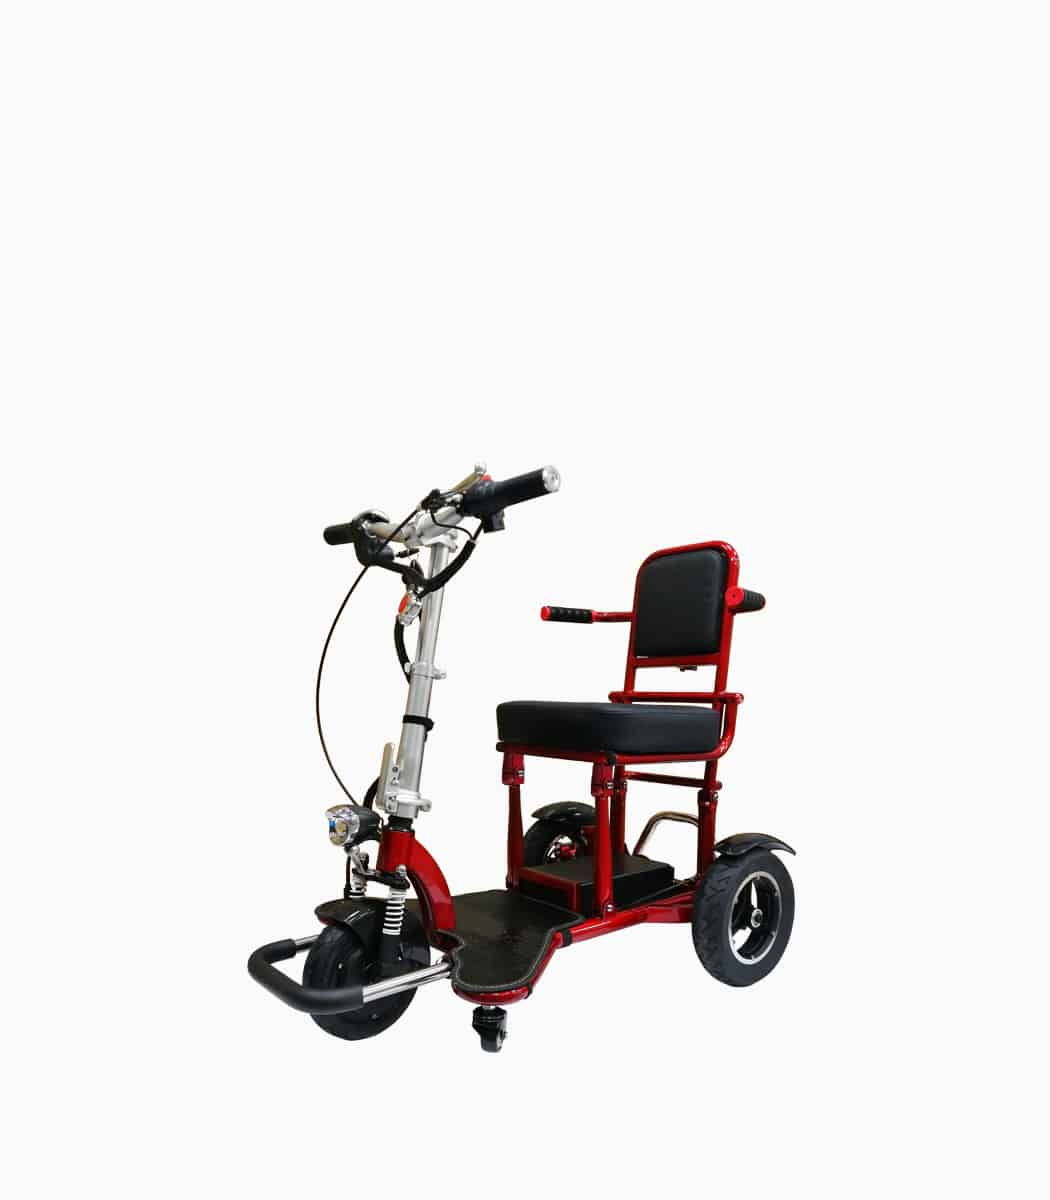 MOBOT FLEXI 4th Gen (RED) 3 wheels mobility scooter angled left V1